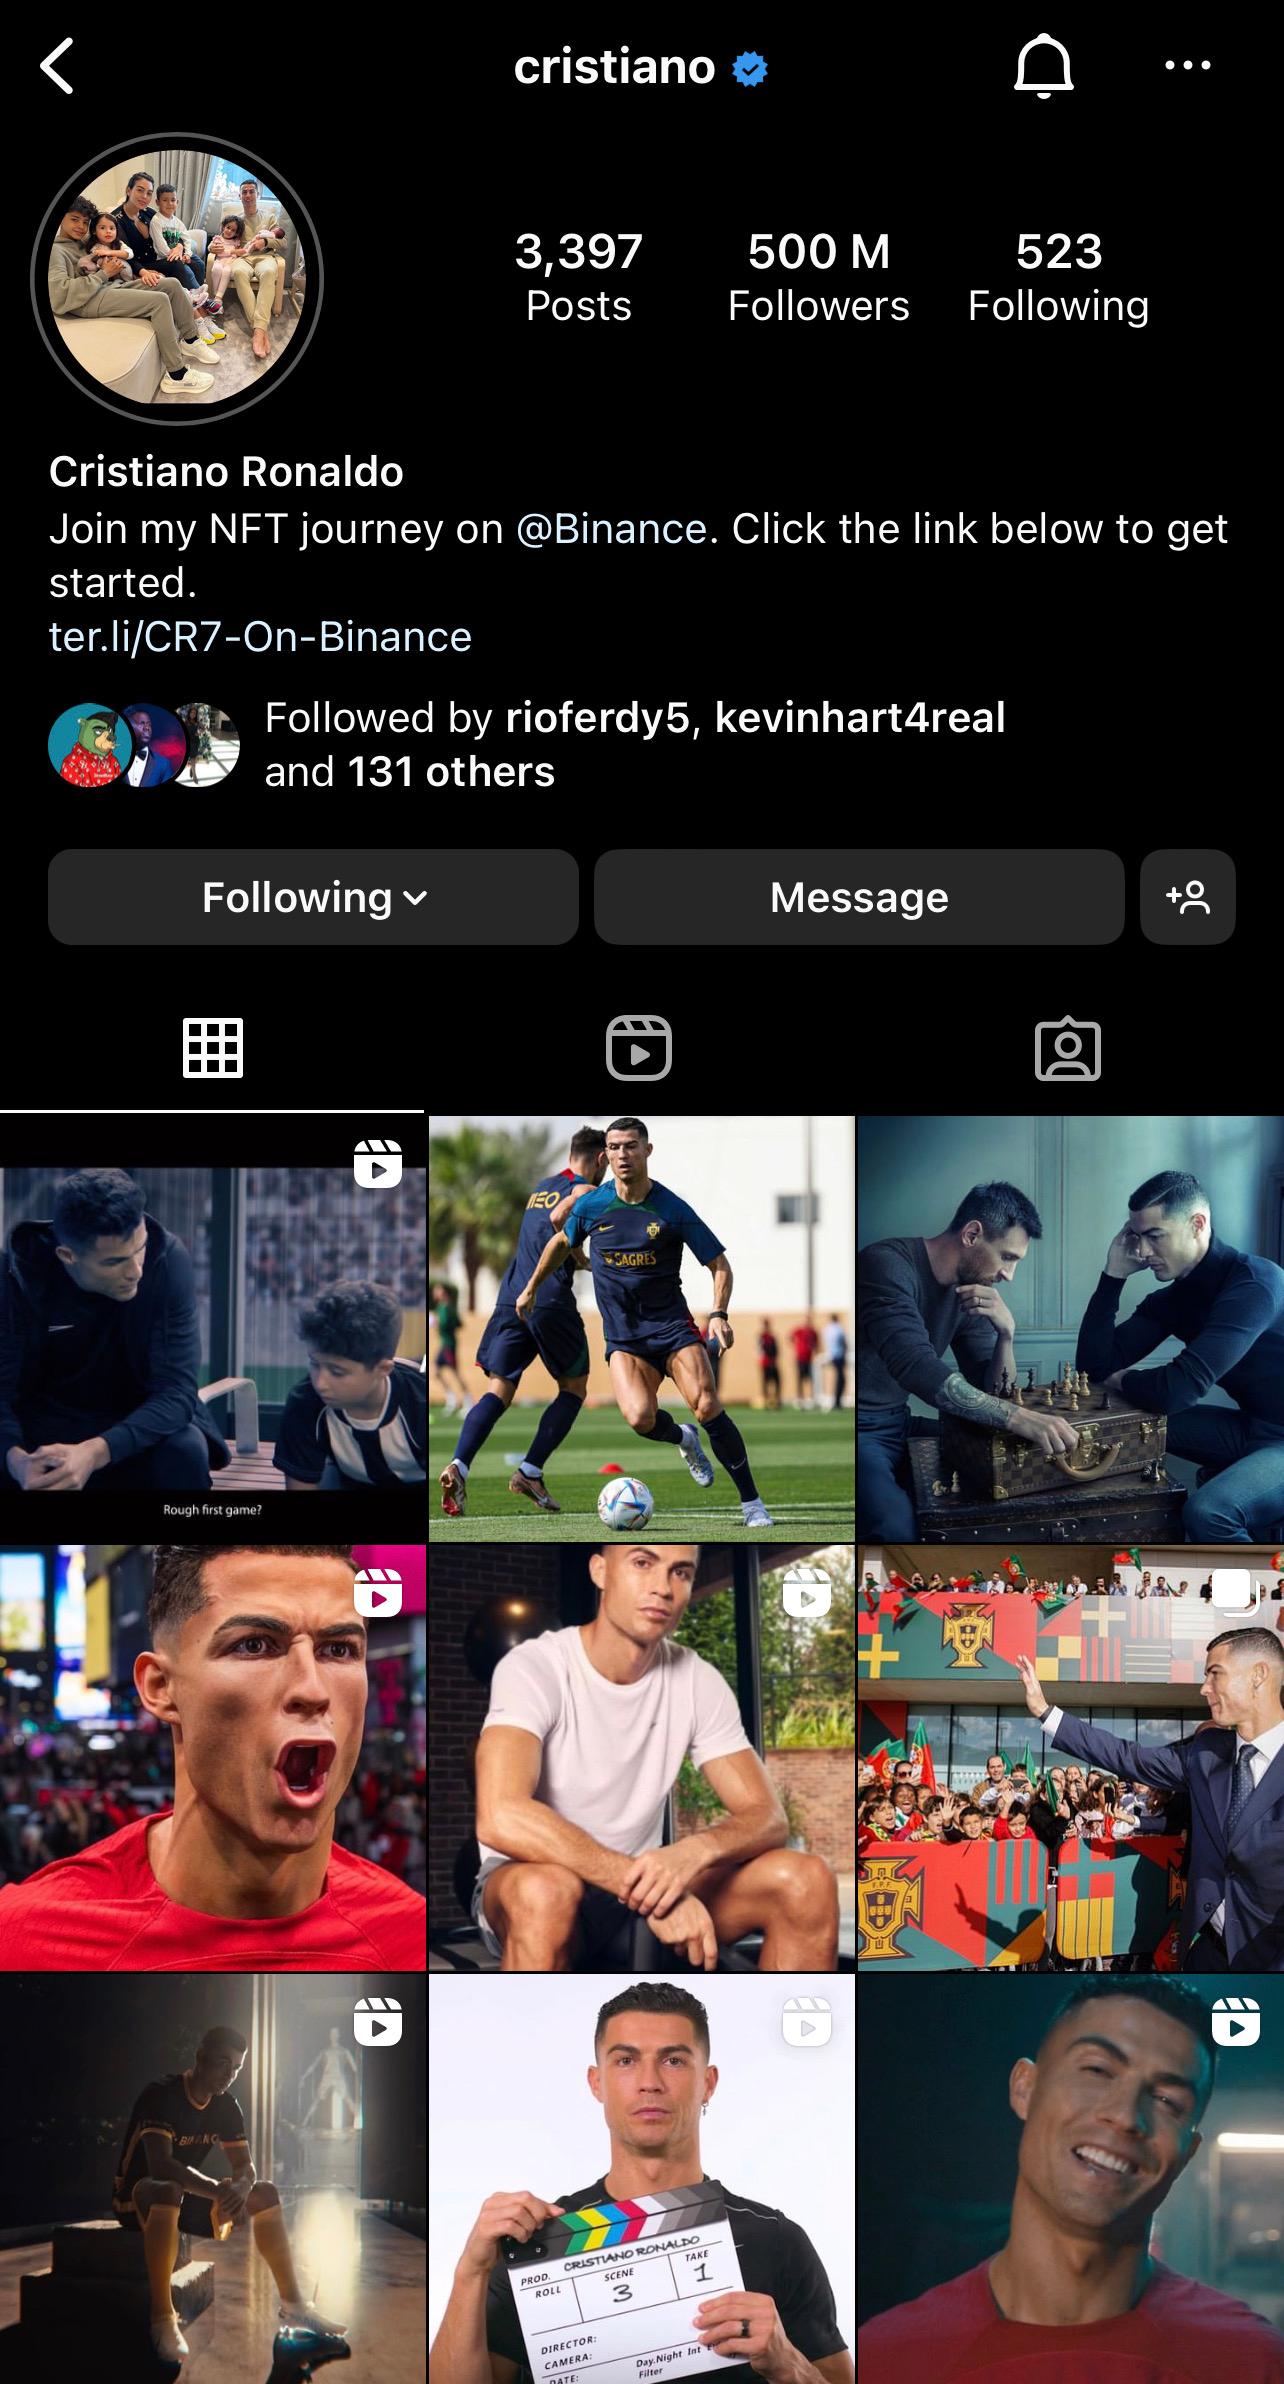 Cristiano Ronaldo's Instagram page showing his number of followers.